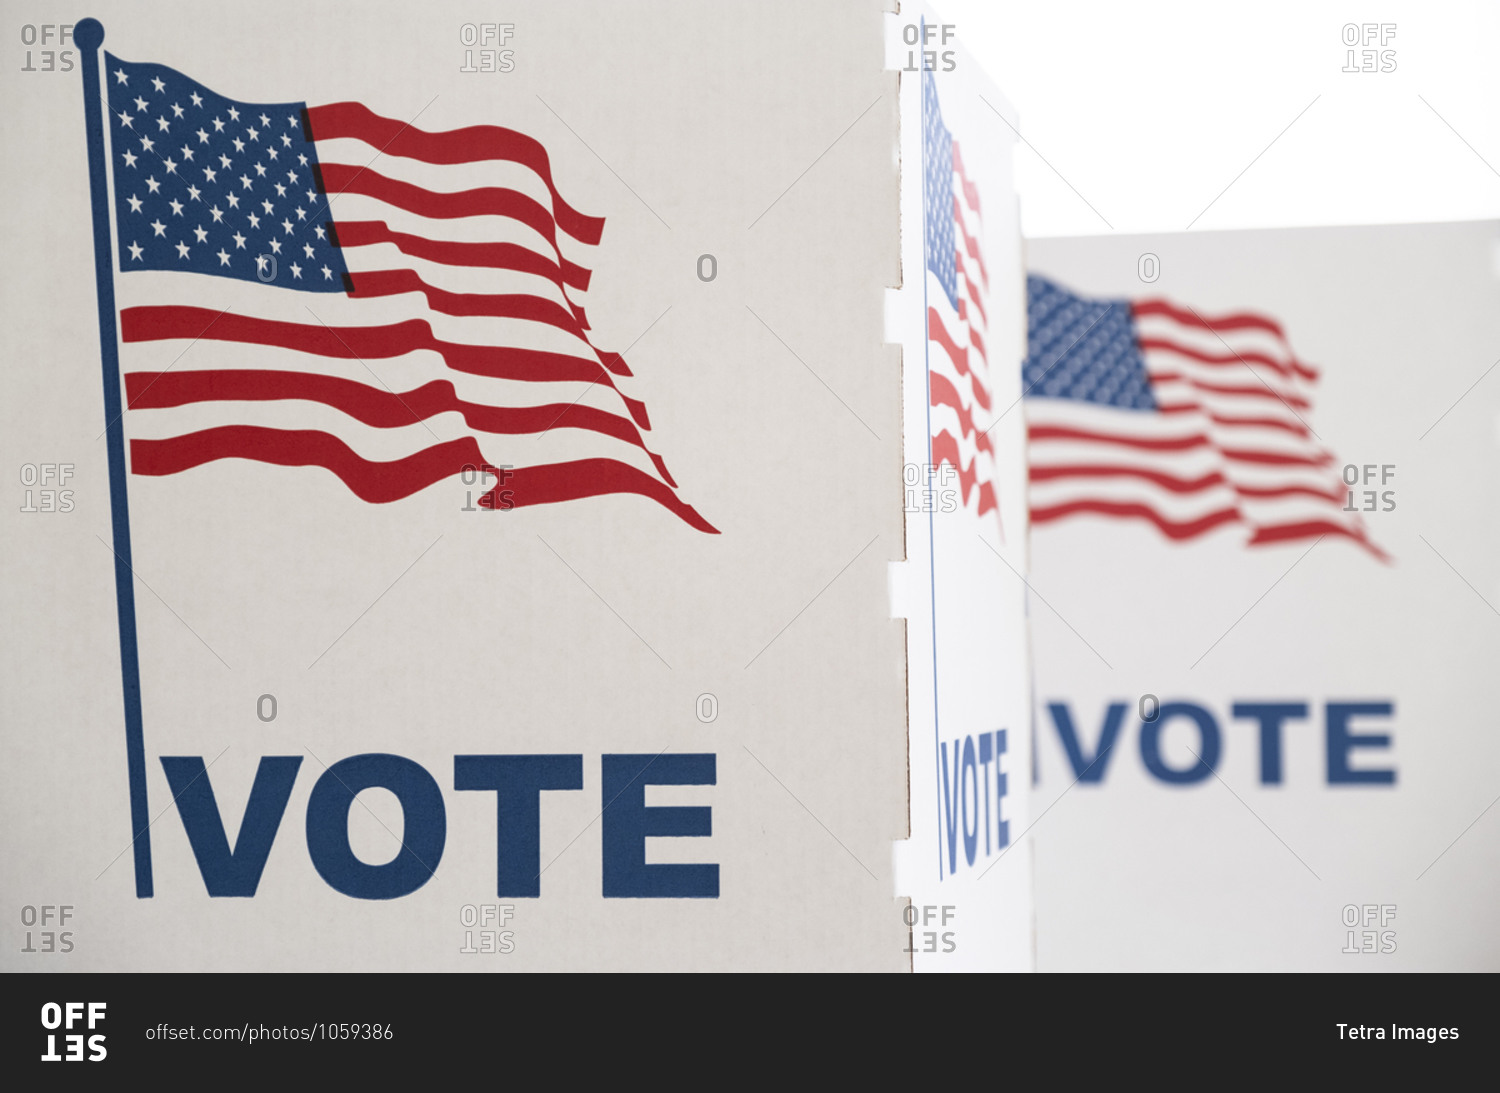 Voting booth with US flag stock photo - OFFSET